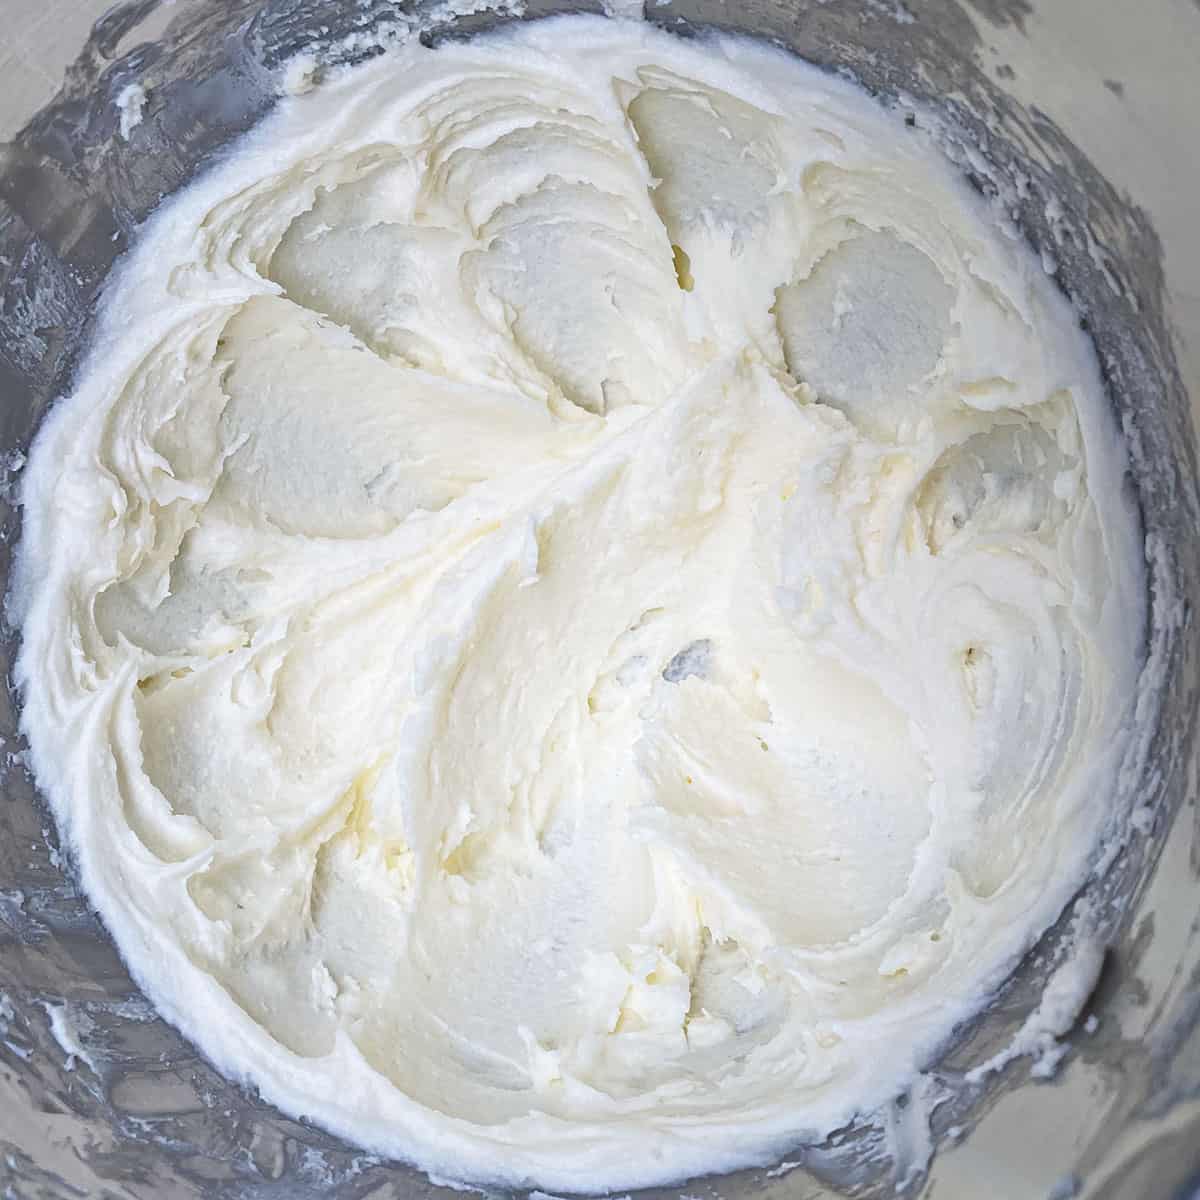 Cream cheese, butter and sugar whipped up in a mixer bowl. Lots of soft peaks.